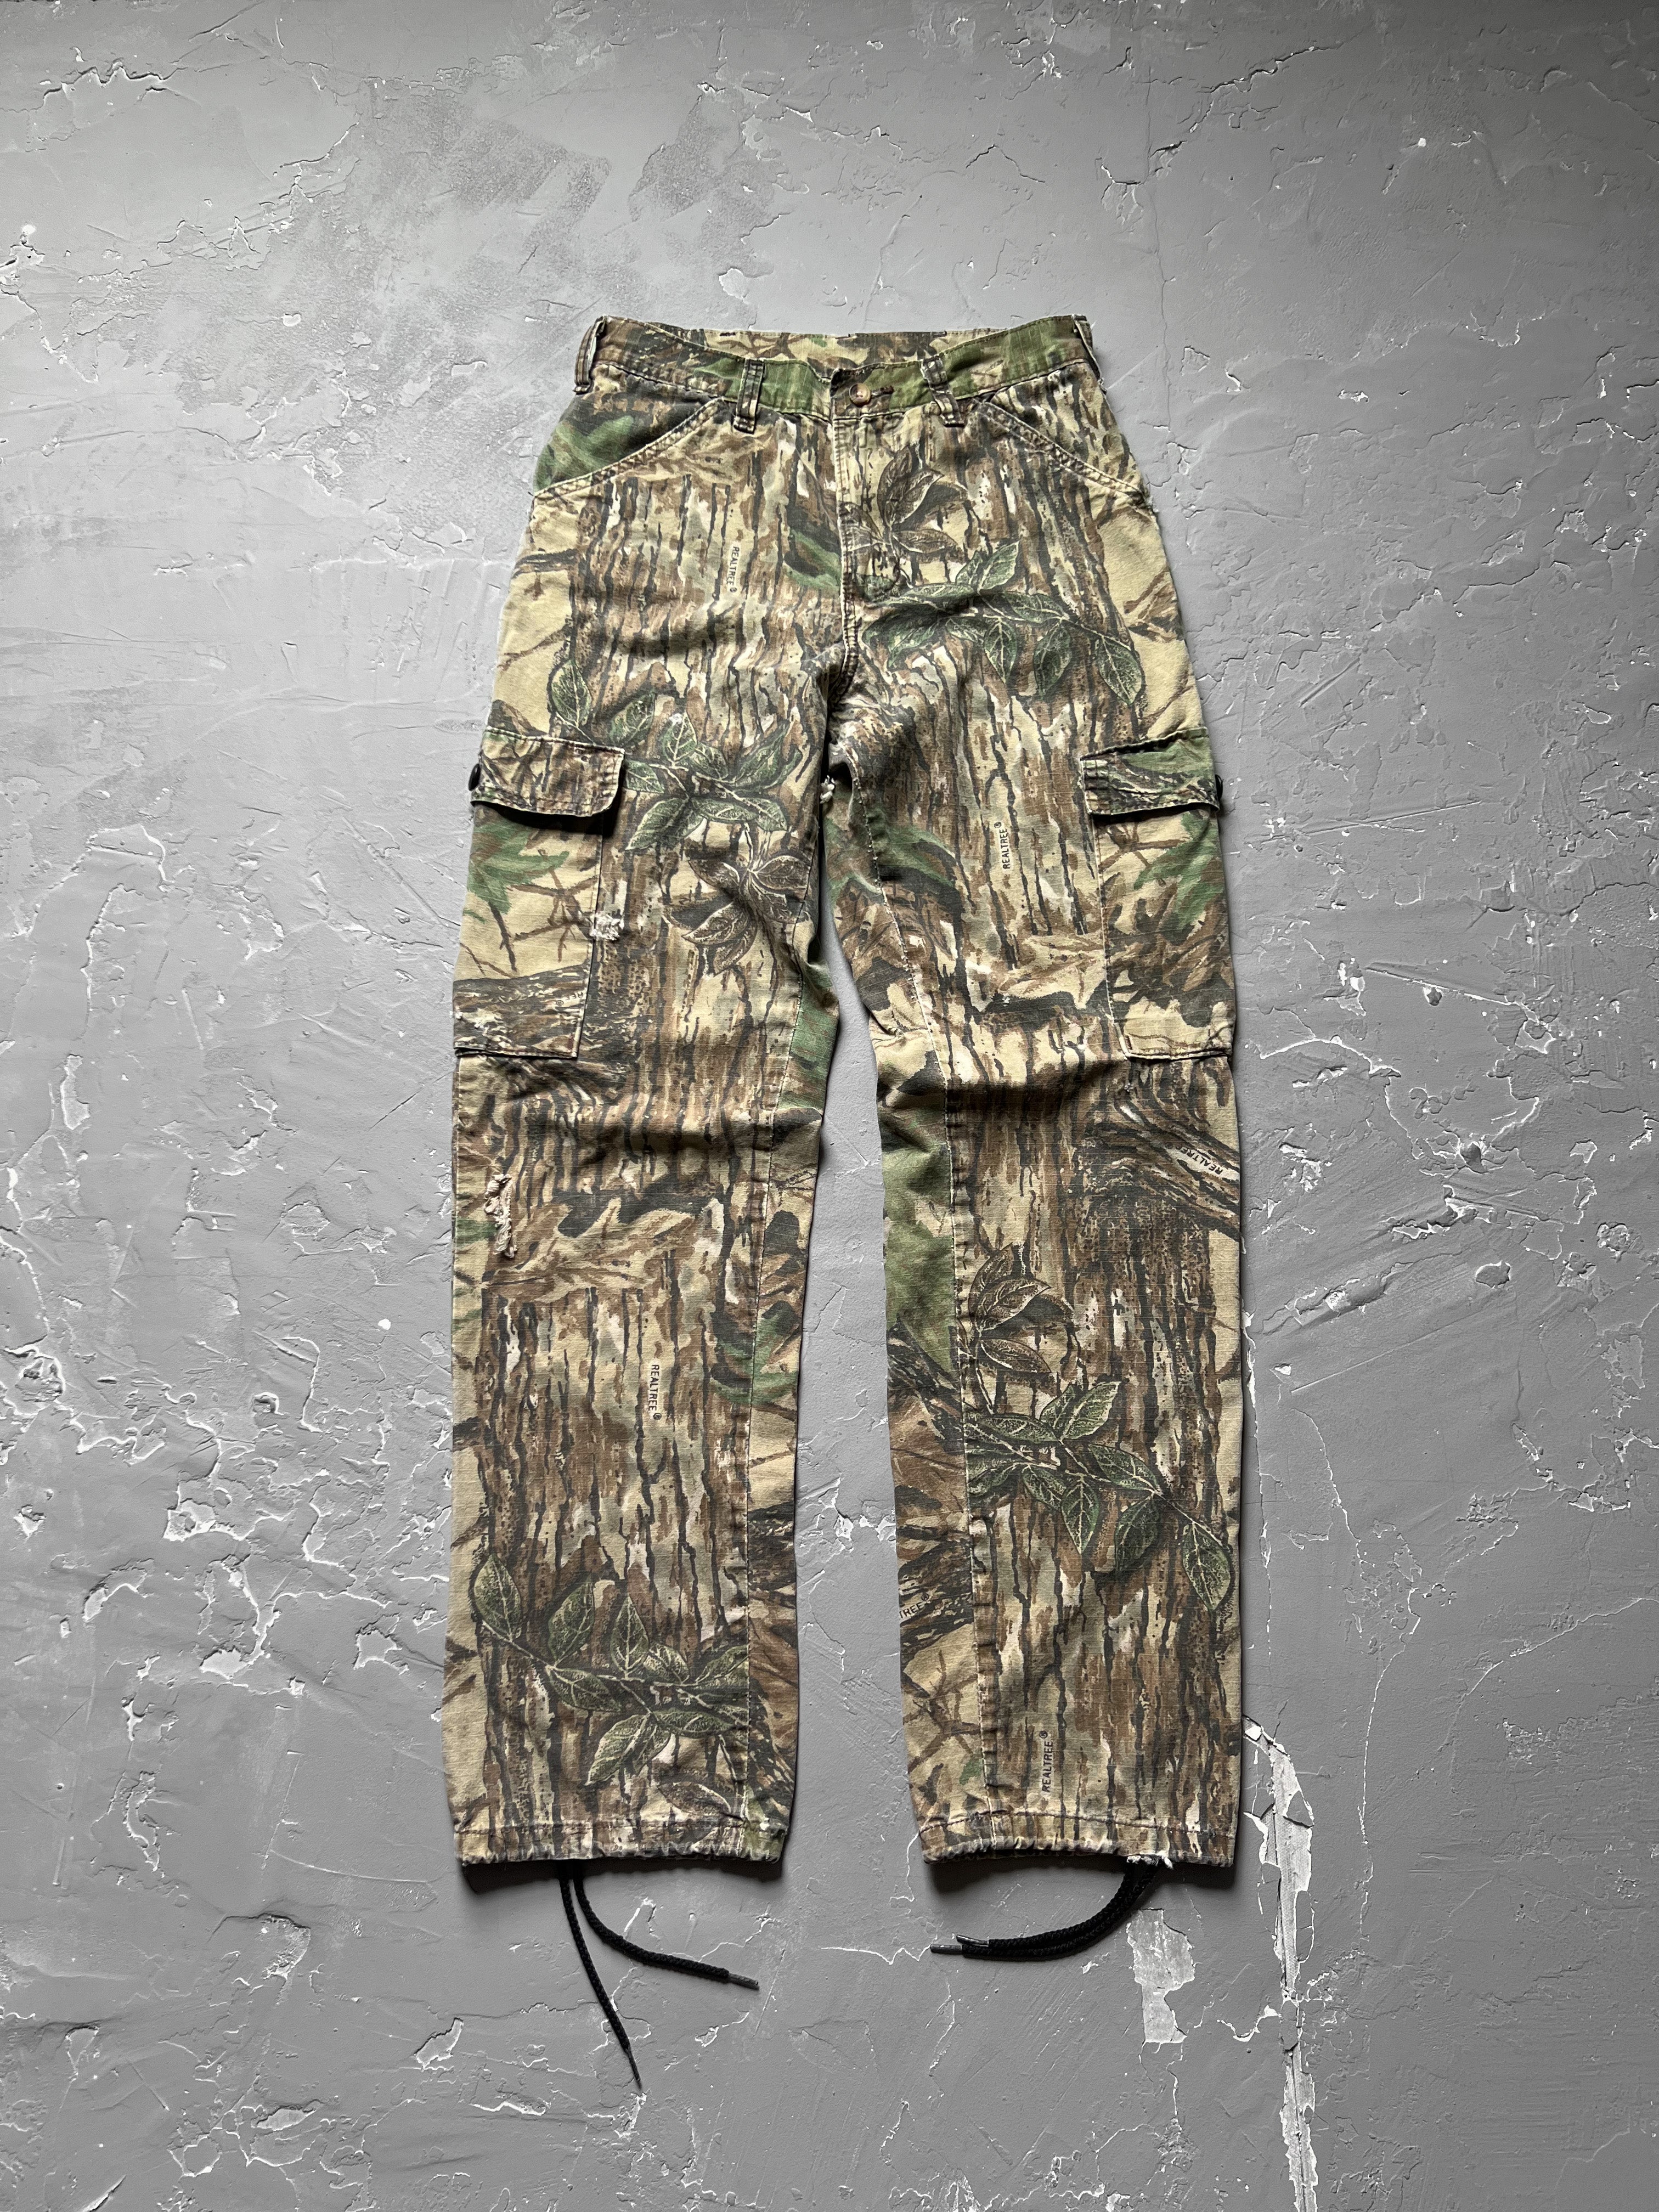 1990s Realtree Camouflage Utility Cargo Pants [24-28 x 30] – From